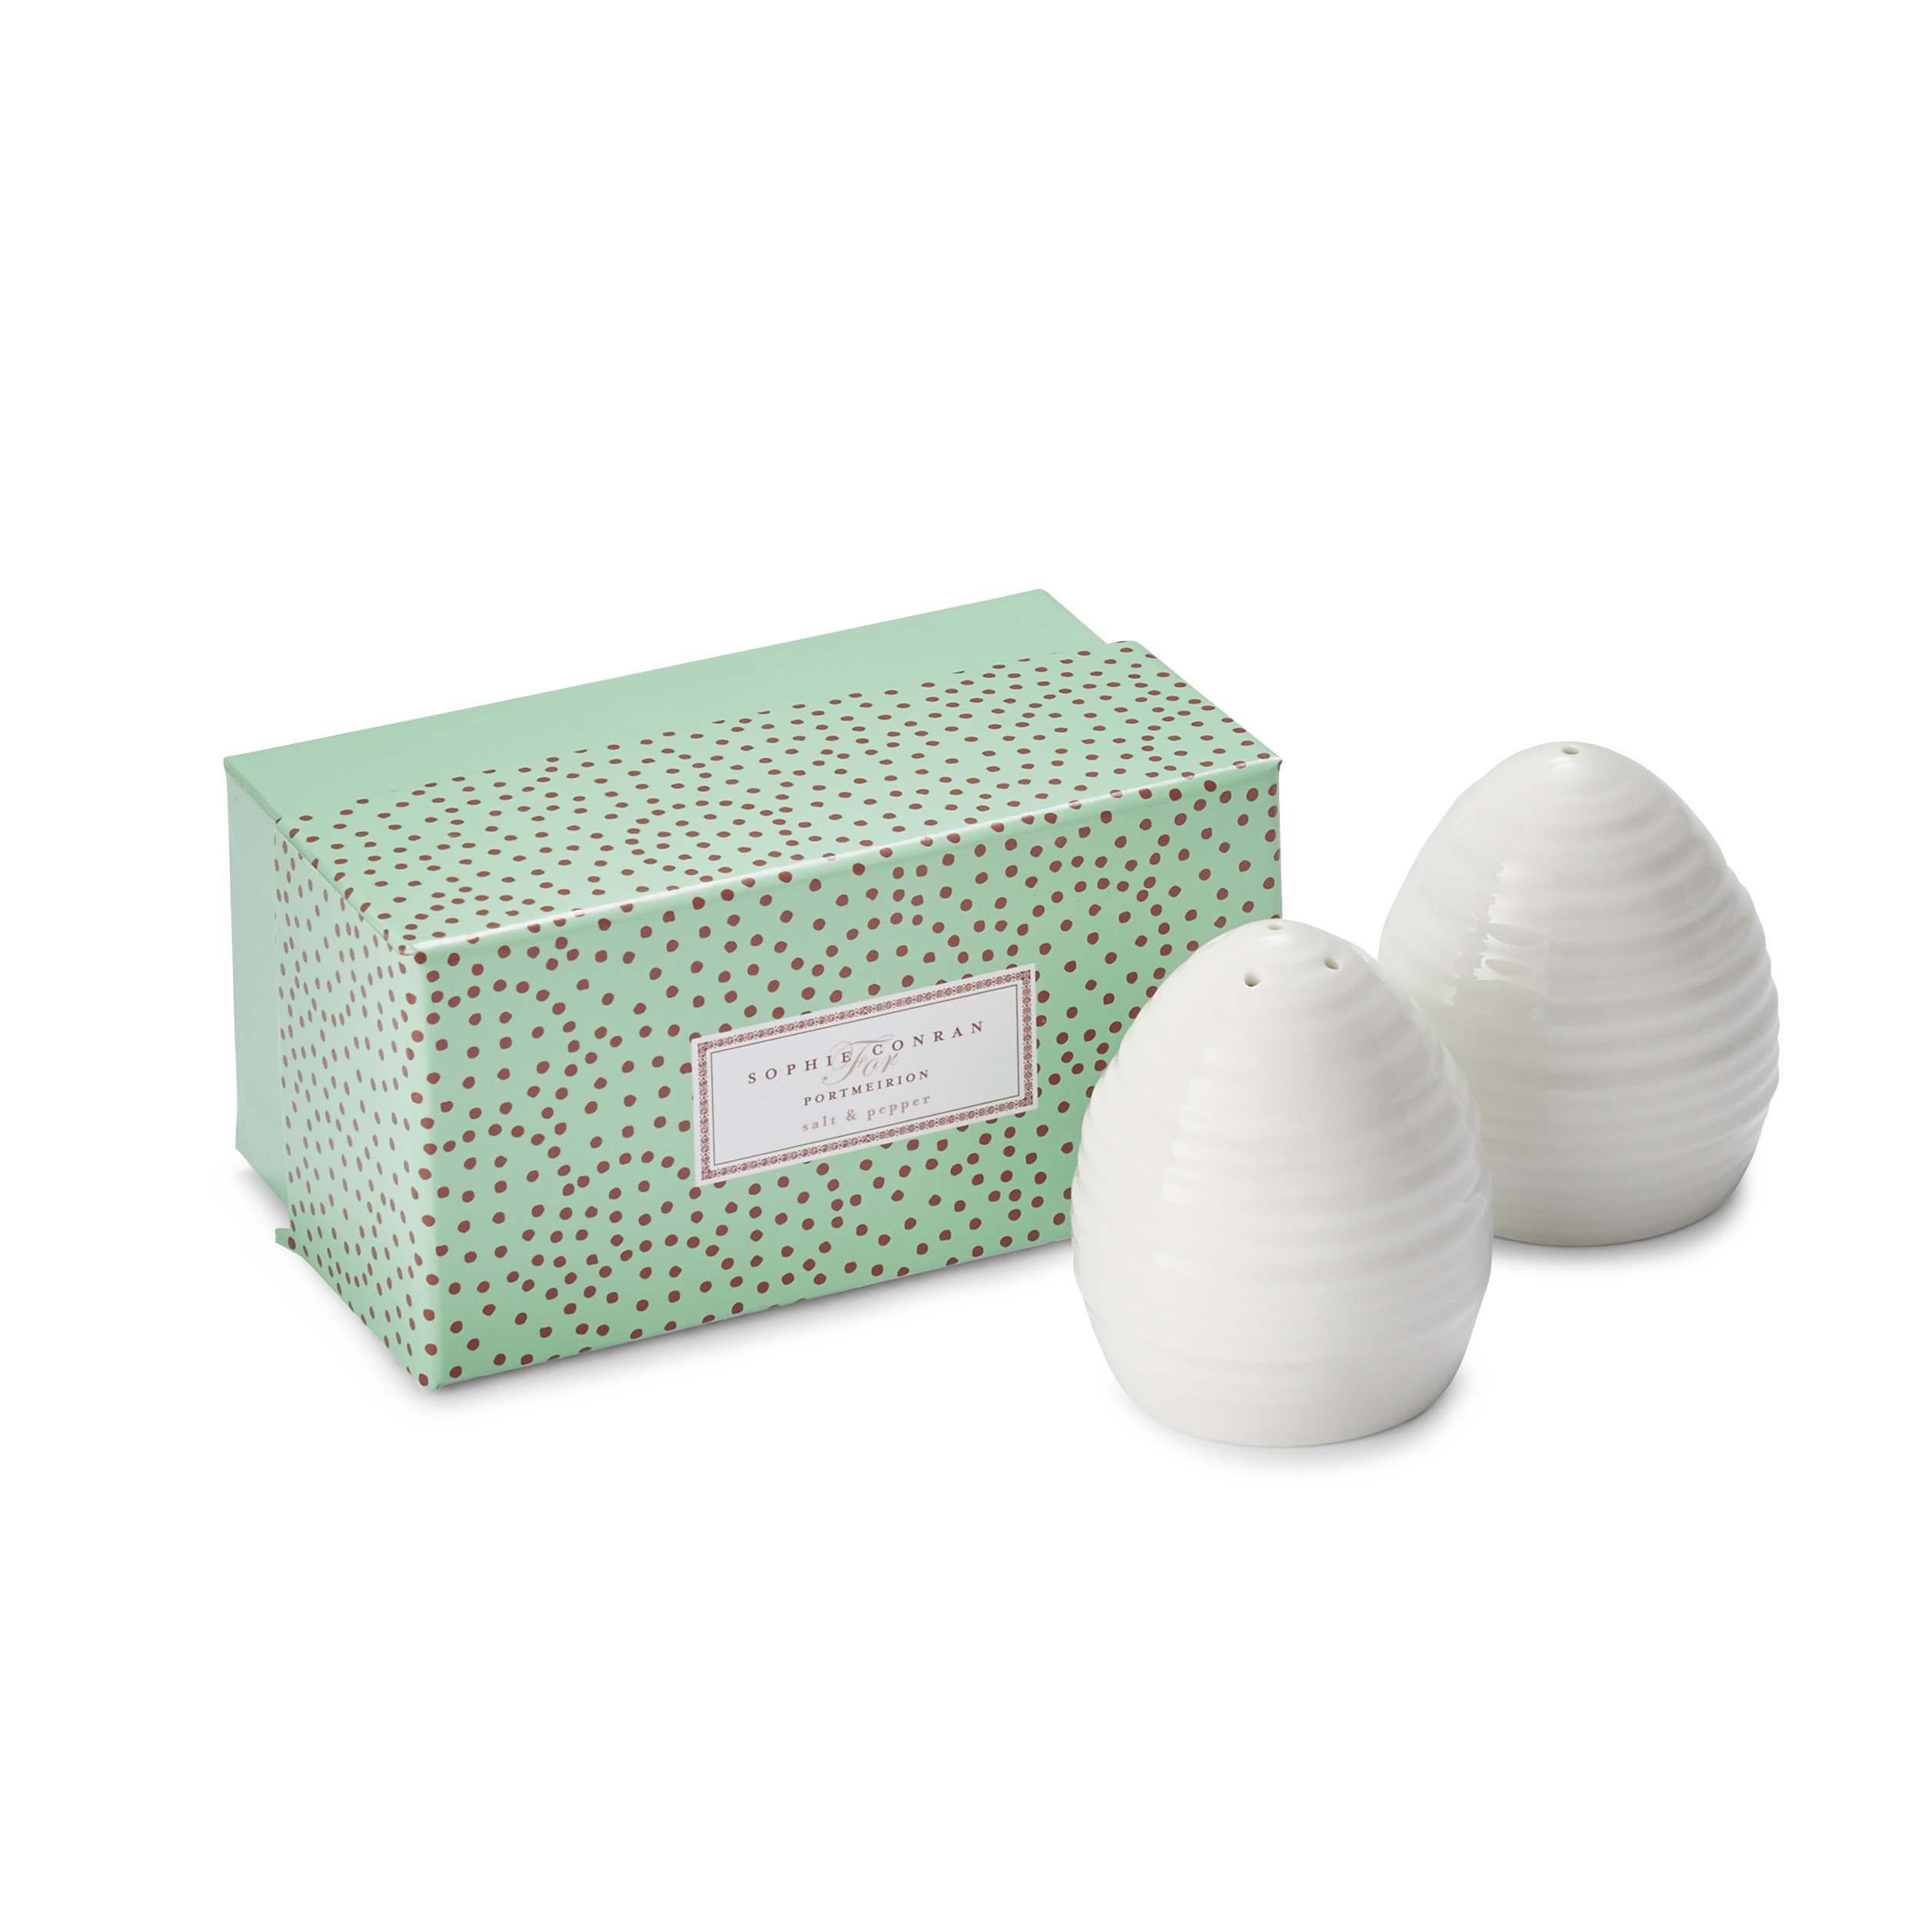 Sophie Conran for White Salt and Pepper Set image number null